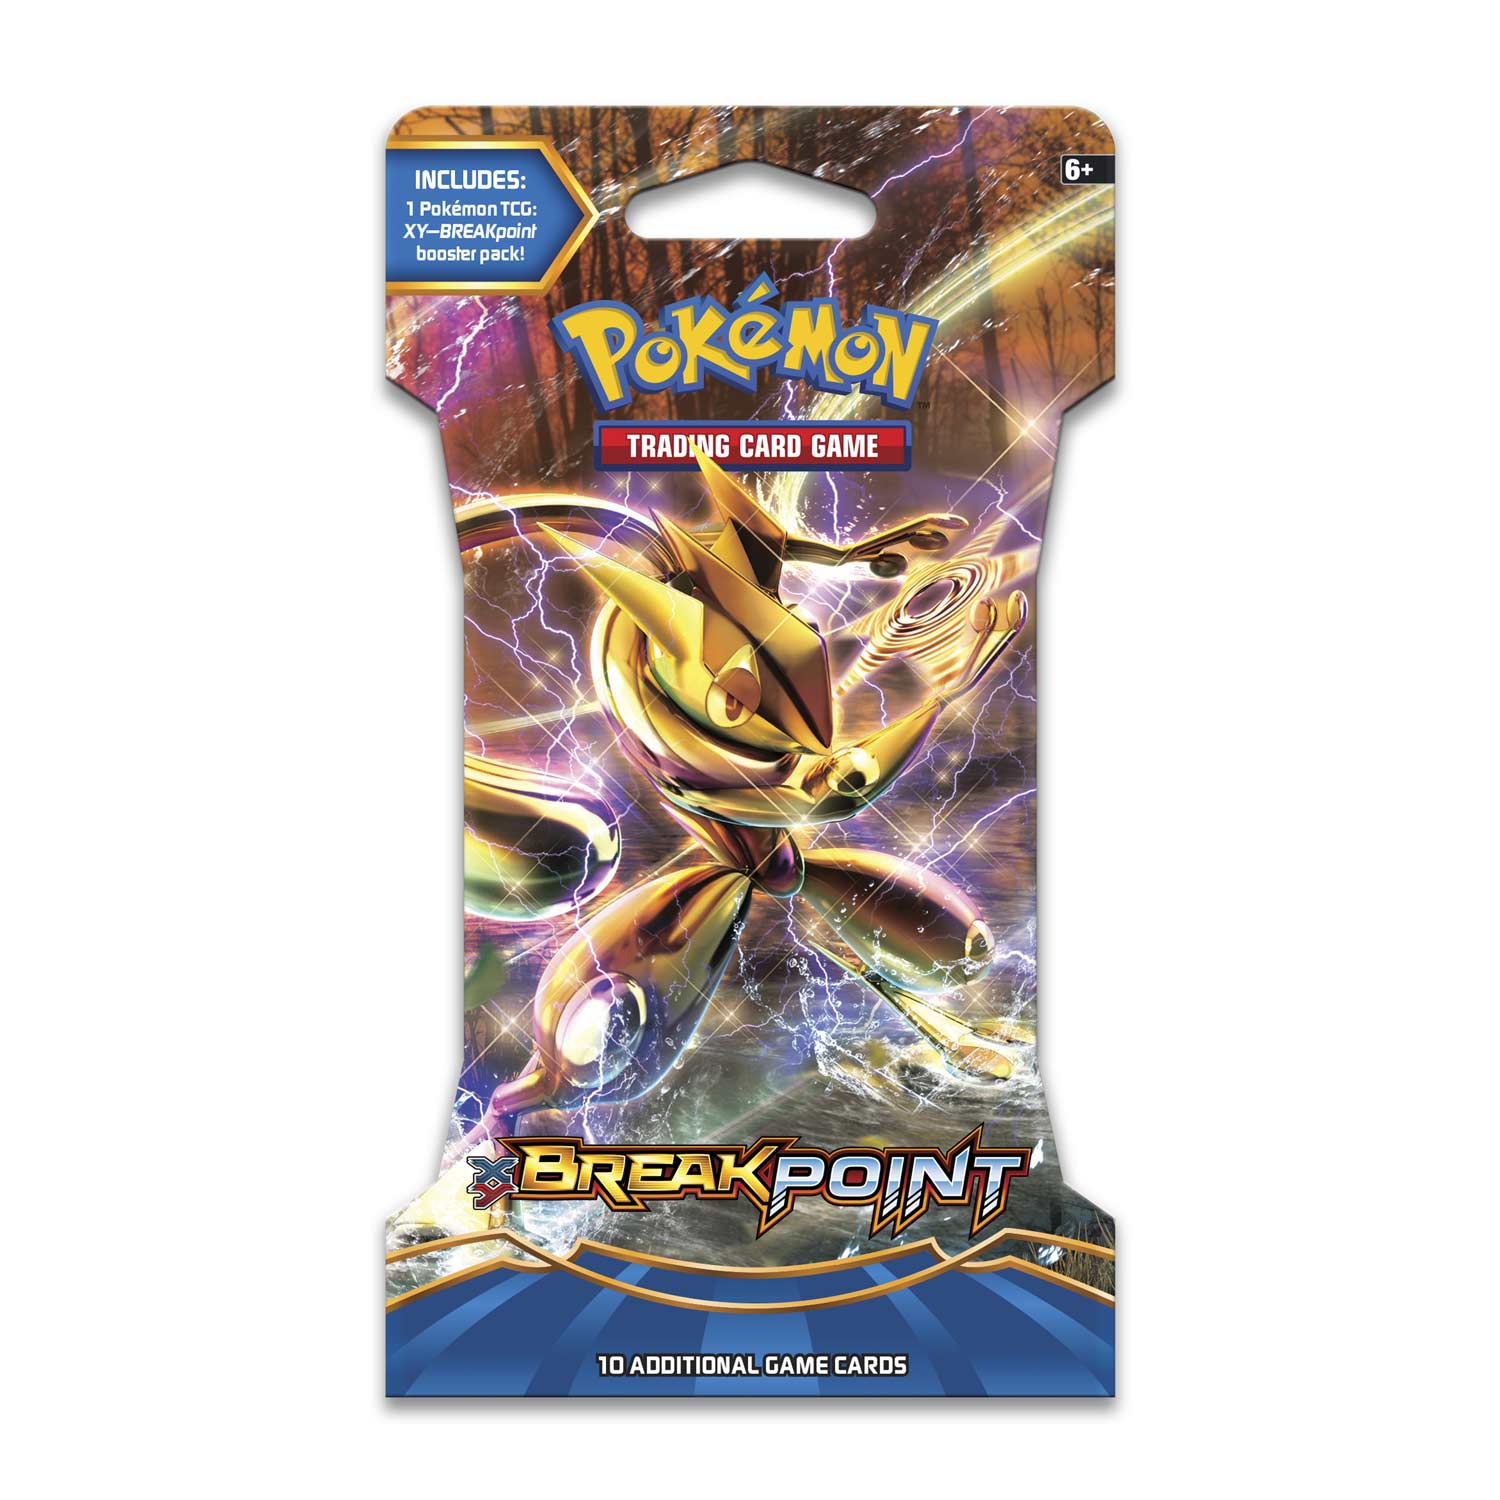 FBA_152-80070 for sale online XY BREAKpoint Sleeved Booster Pack Pokemon TCG 